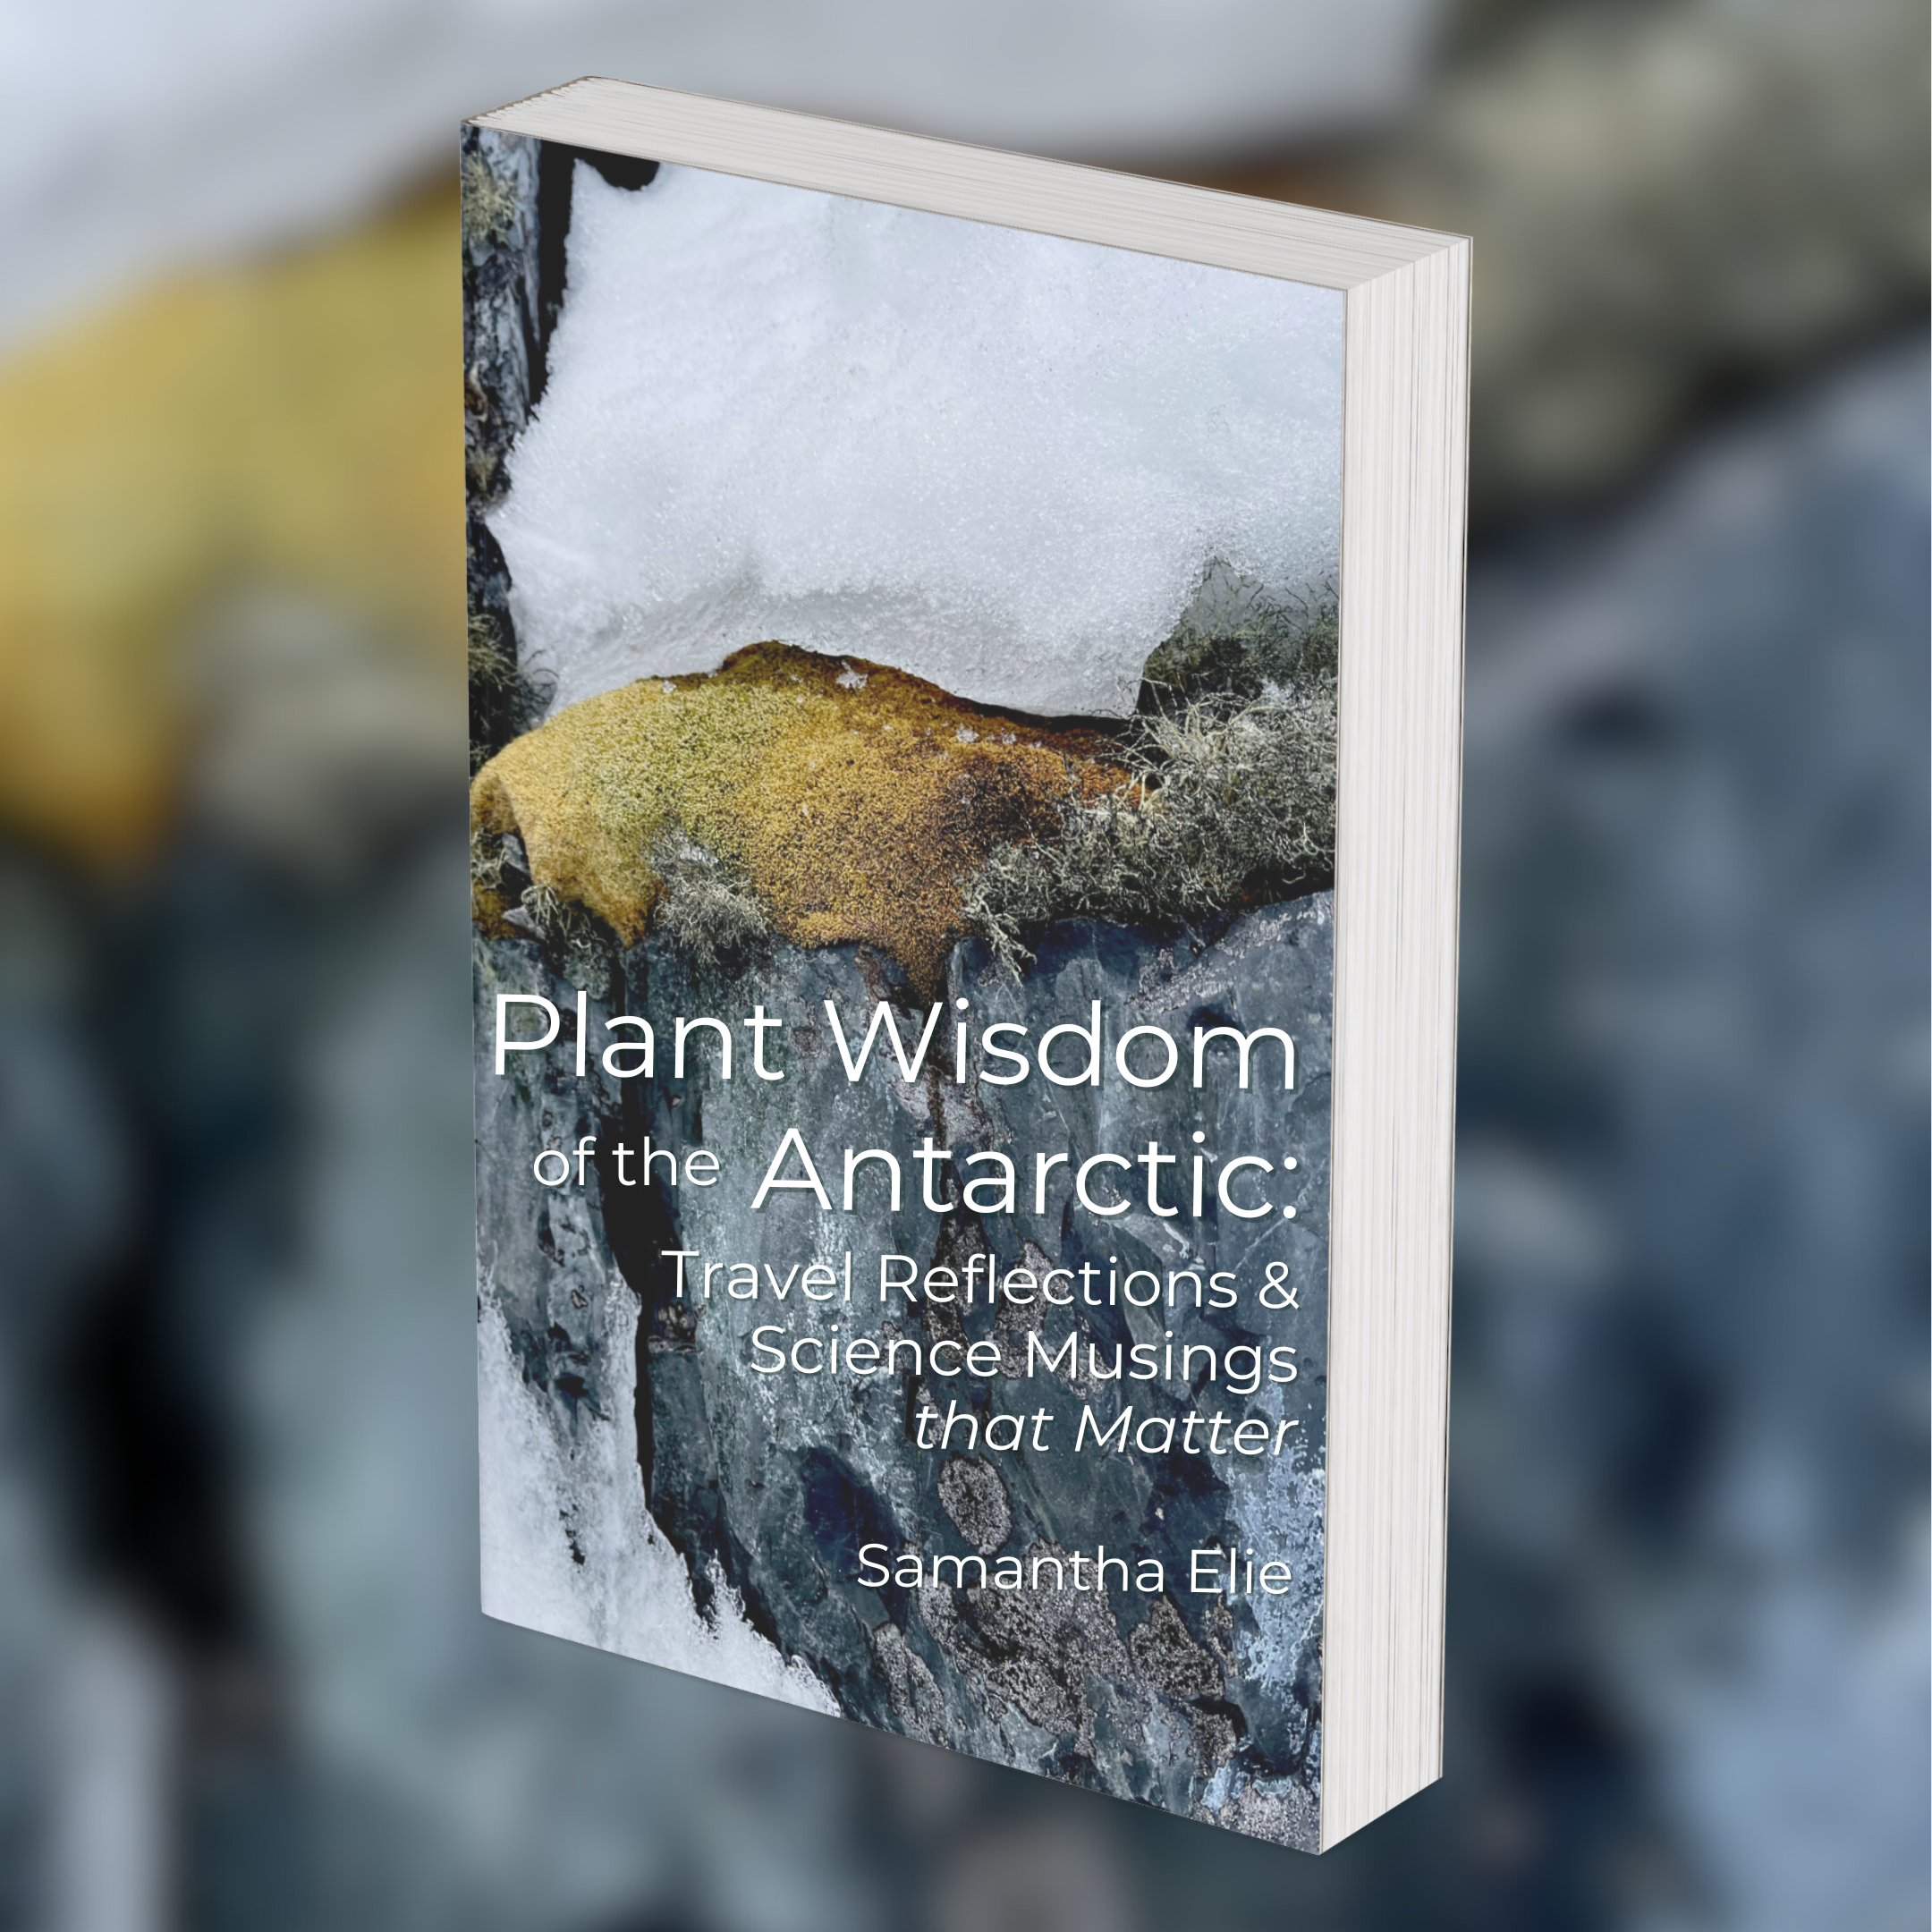 Photo mockup of book cover "Plant Wisdom of the Antarctic: Travel Reflections & Science Musings that Matter"